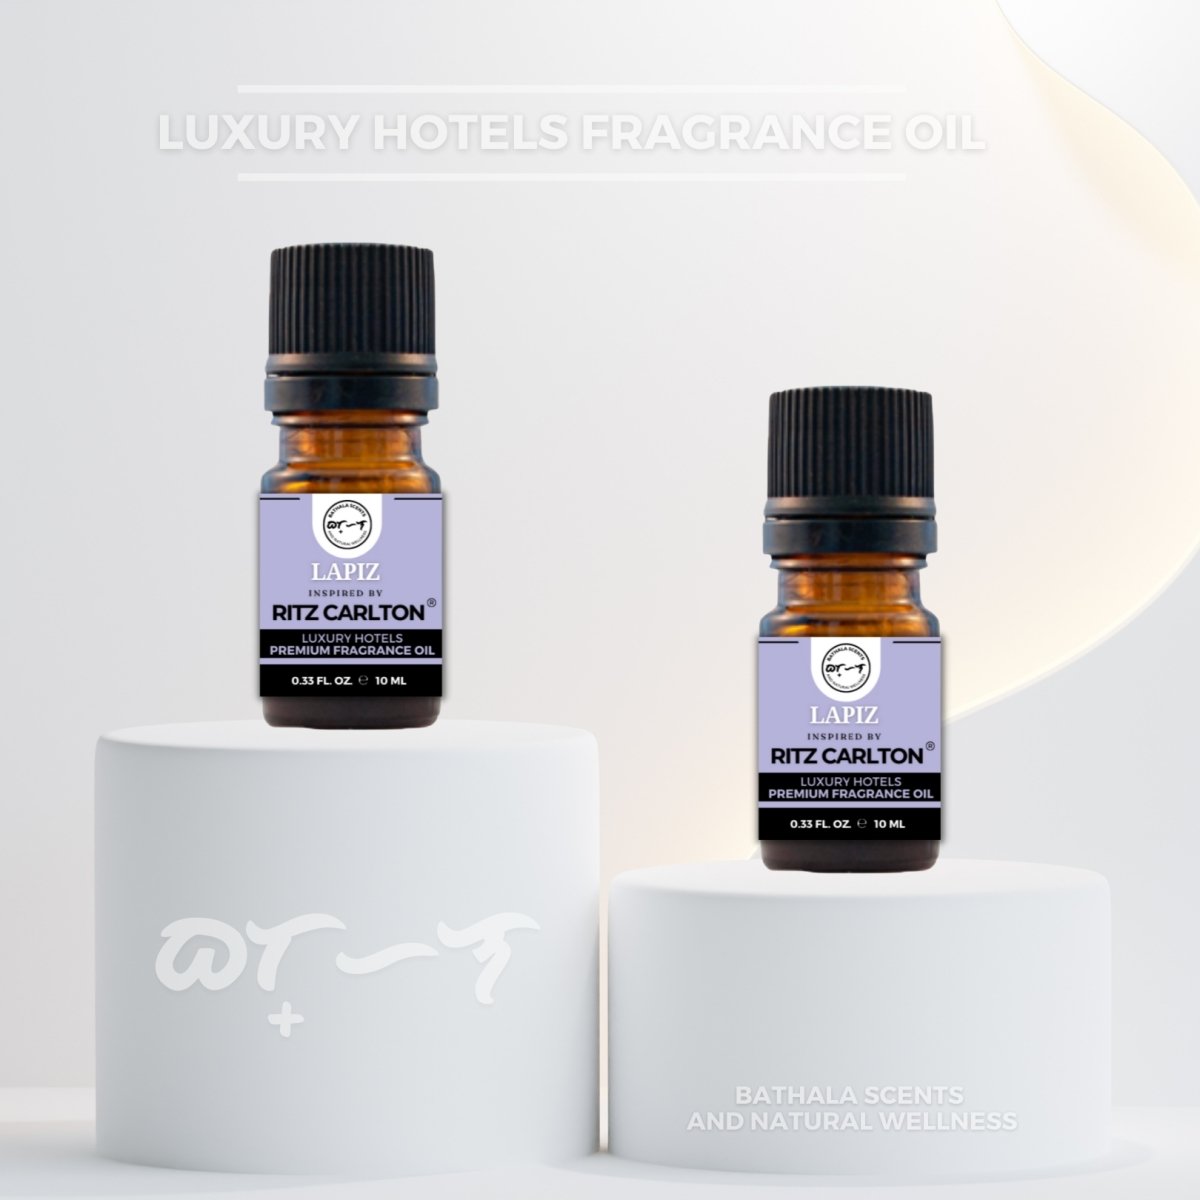 Lapiz Inspired by Ritz Carlton Luxury Hotels Fragrance Oil 10ml - Bathala Scents and Natural Wellness